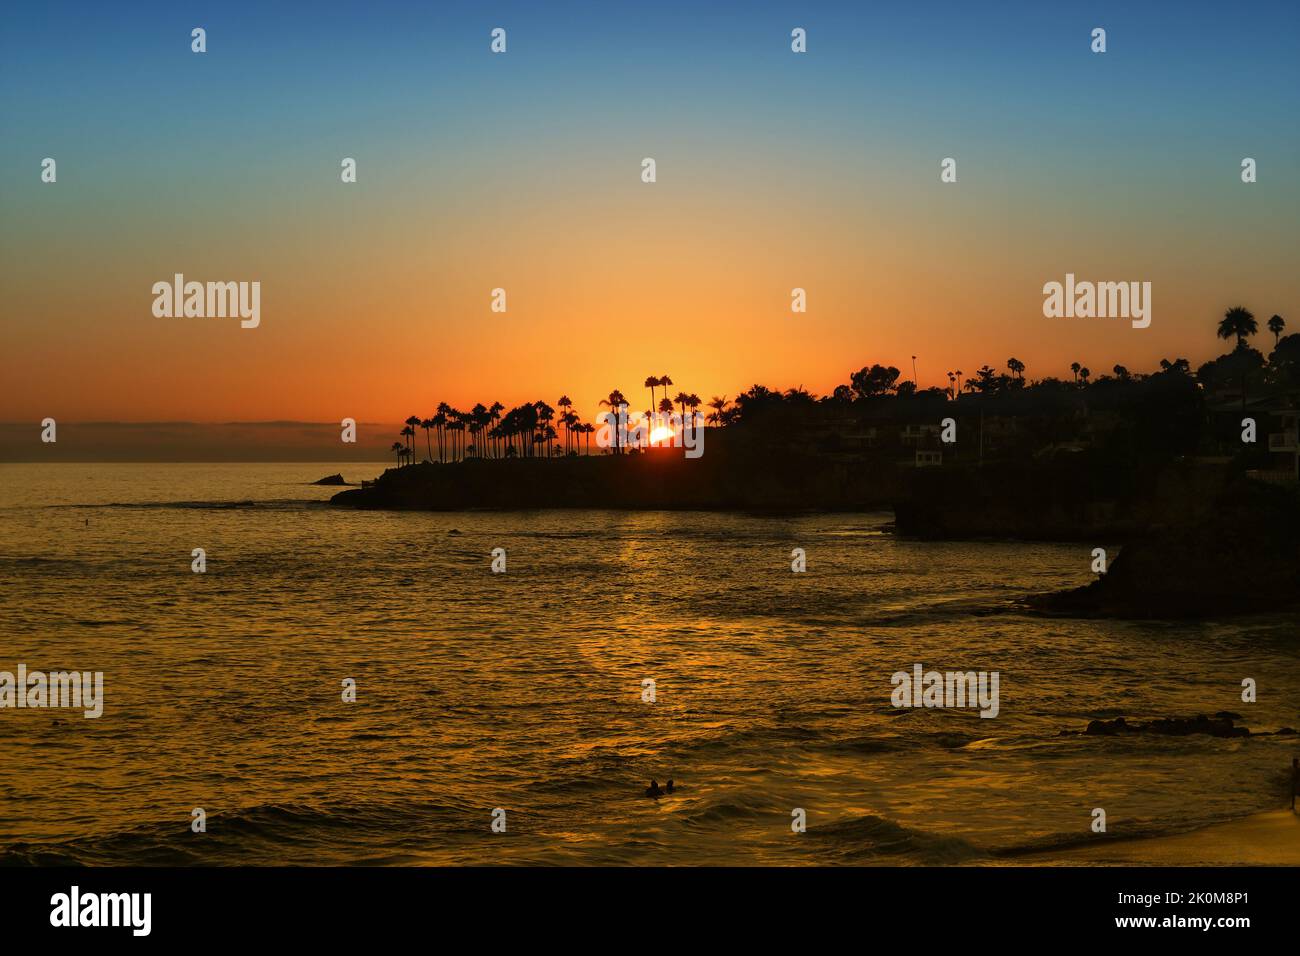 Sun Setting behind Twin Points, Laguna Beach, California, looking over Fishermans Cove, Shaws Cove and Divers Cove. Stock Photo